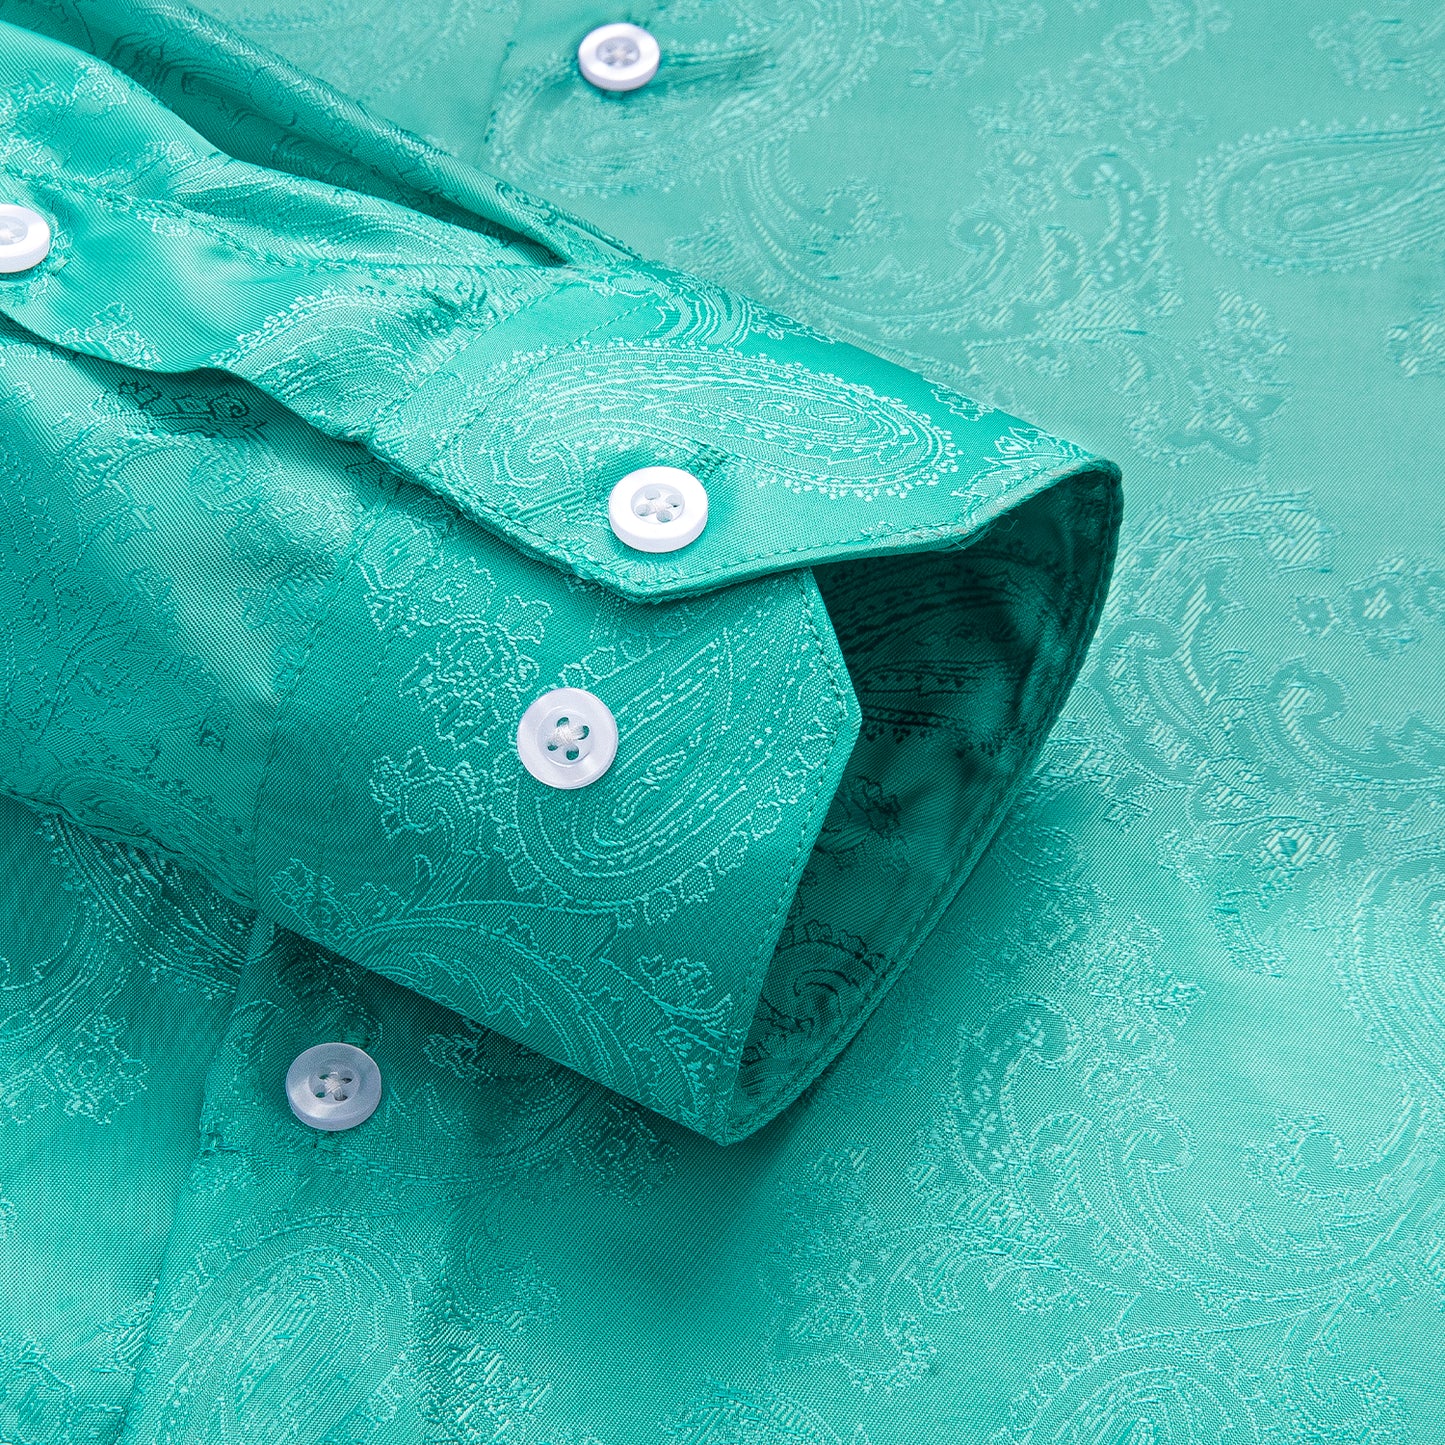 Novelty Silky Shirt - Seagreen Nuts